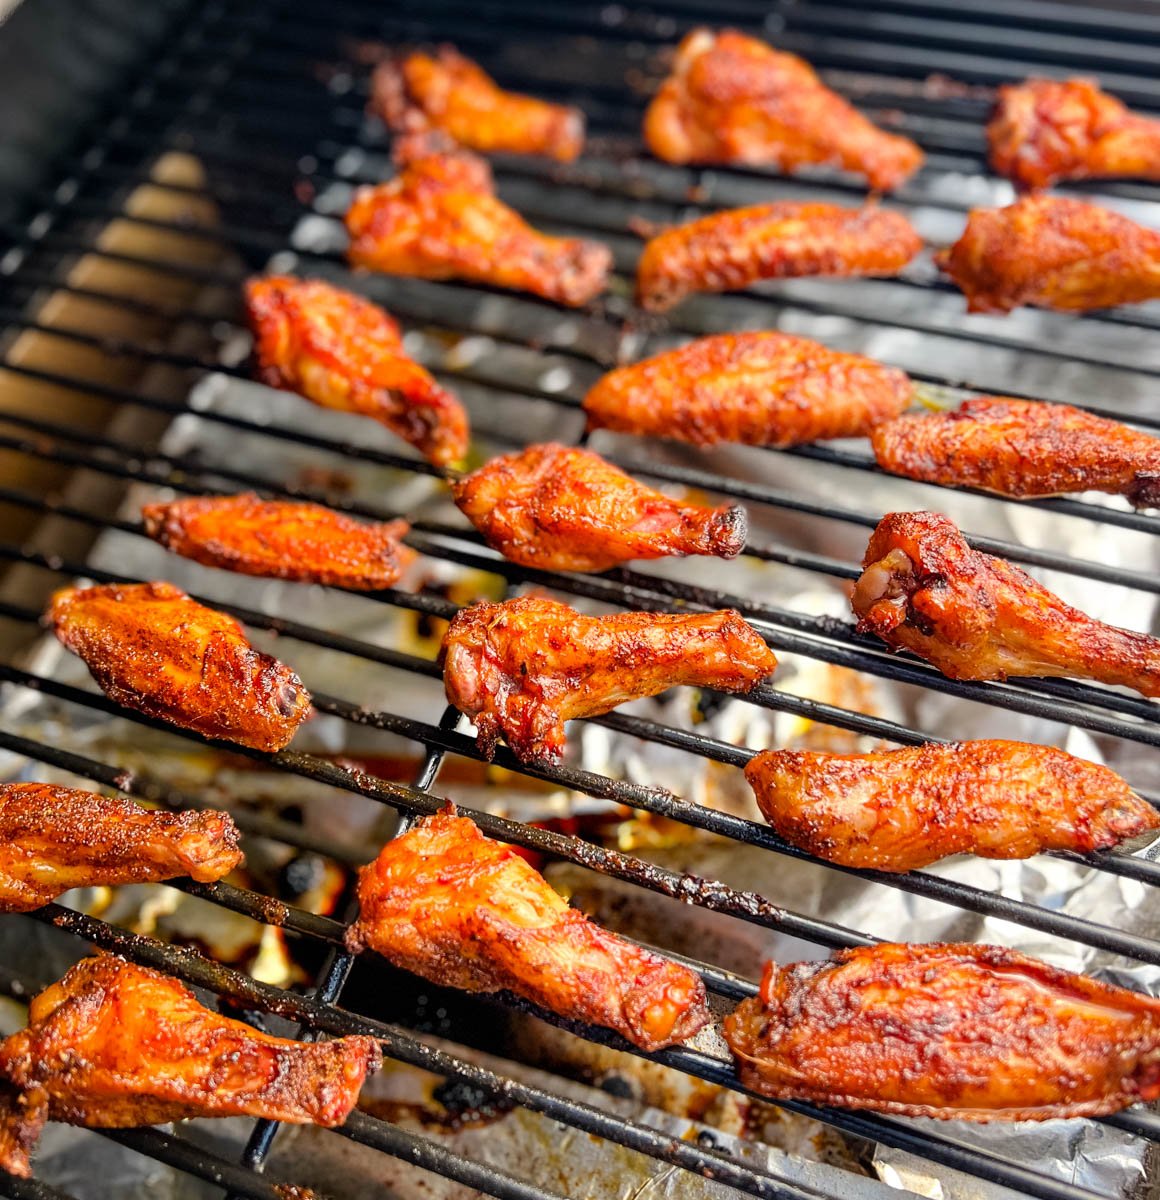 Traeger pellet grill rub, shake, spice. You choose the flavor